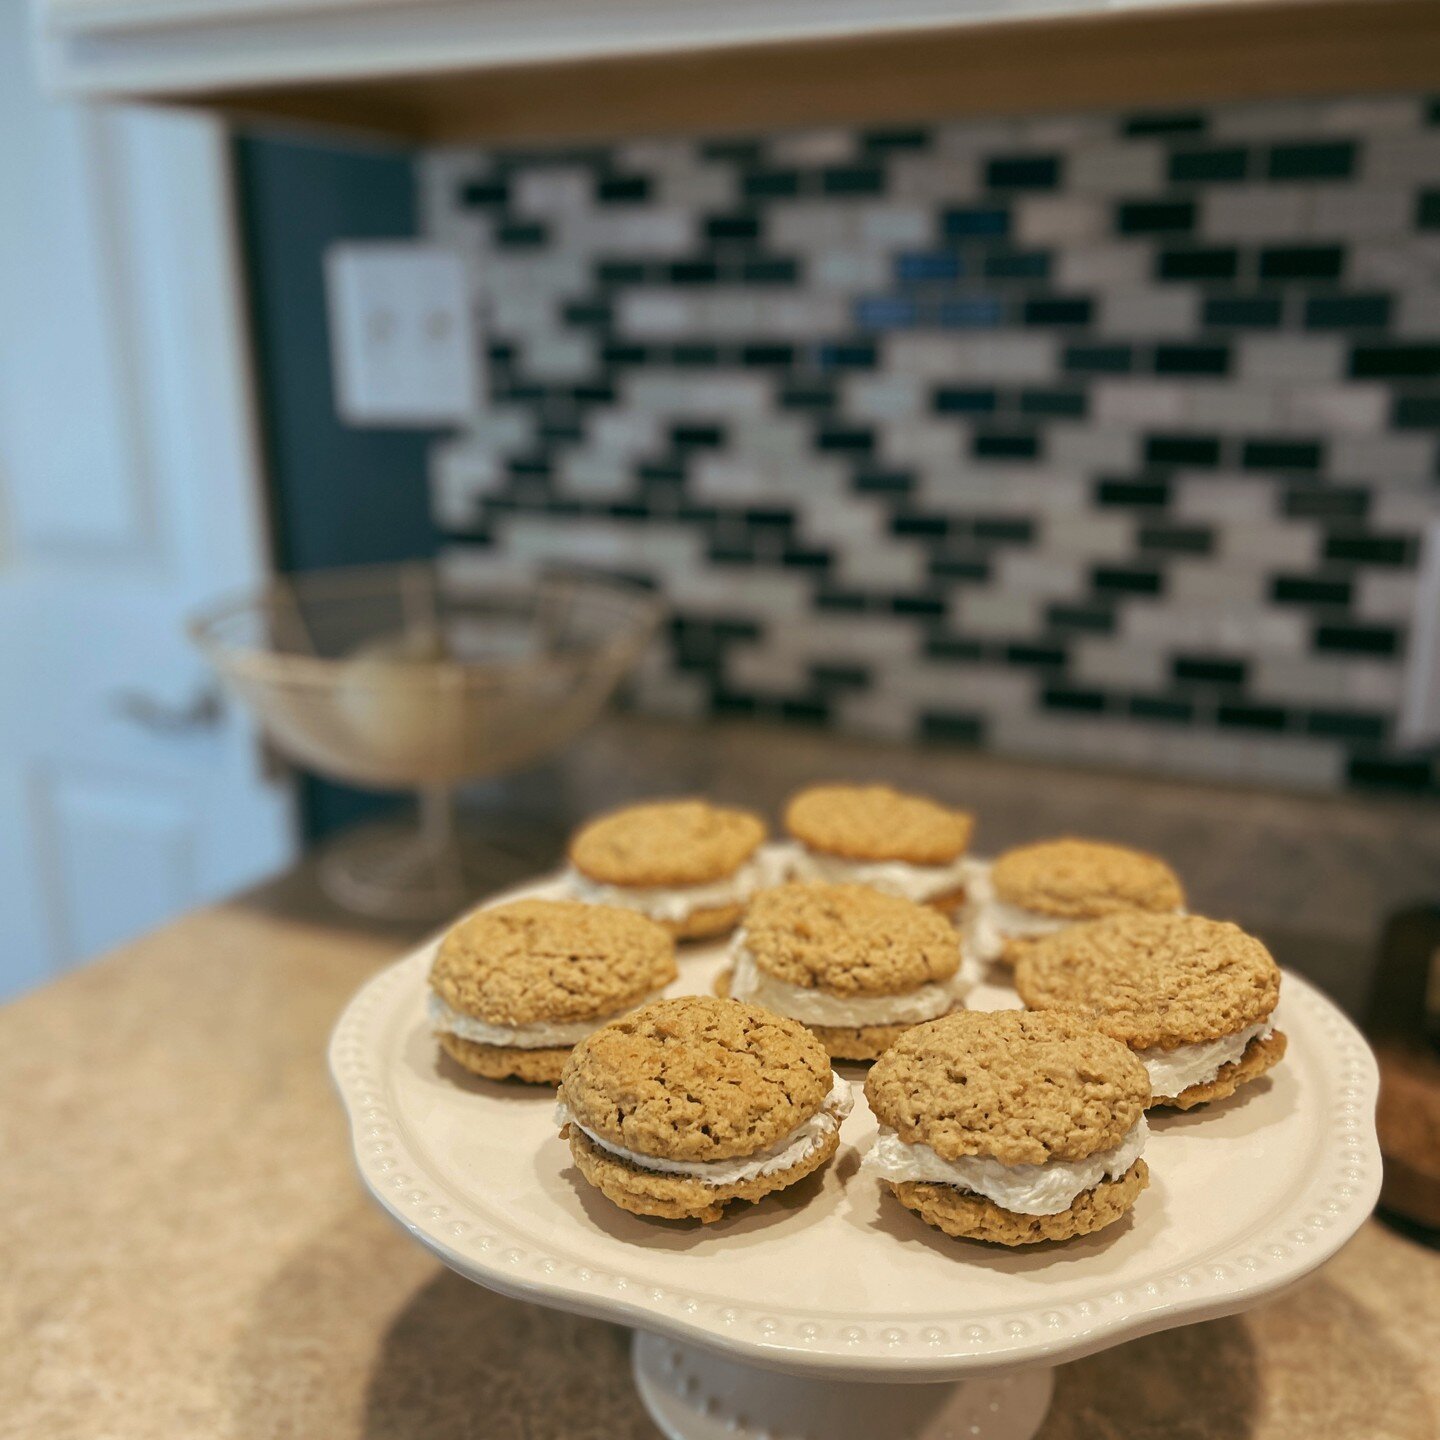 HOMEMADE OATMEAL CREAM PIES 🍪

There are not enough words to describe how delicious these are. I know some may curse me for saying this, but you won&rsquo;t even miss the Little Debbie version.. 

They&rsquo;re soft and chewy, and the vanilla butter